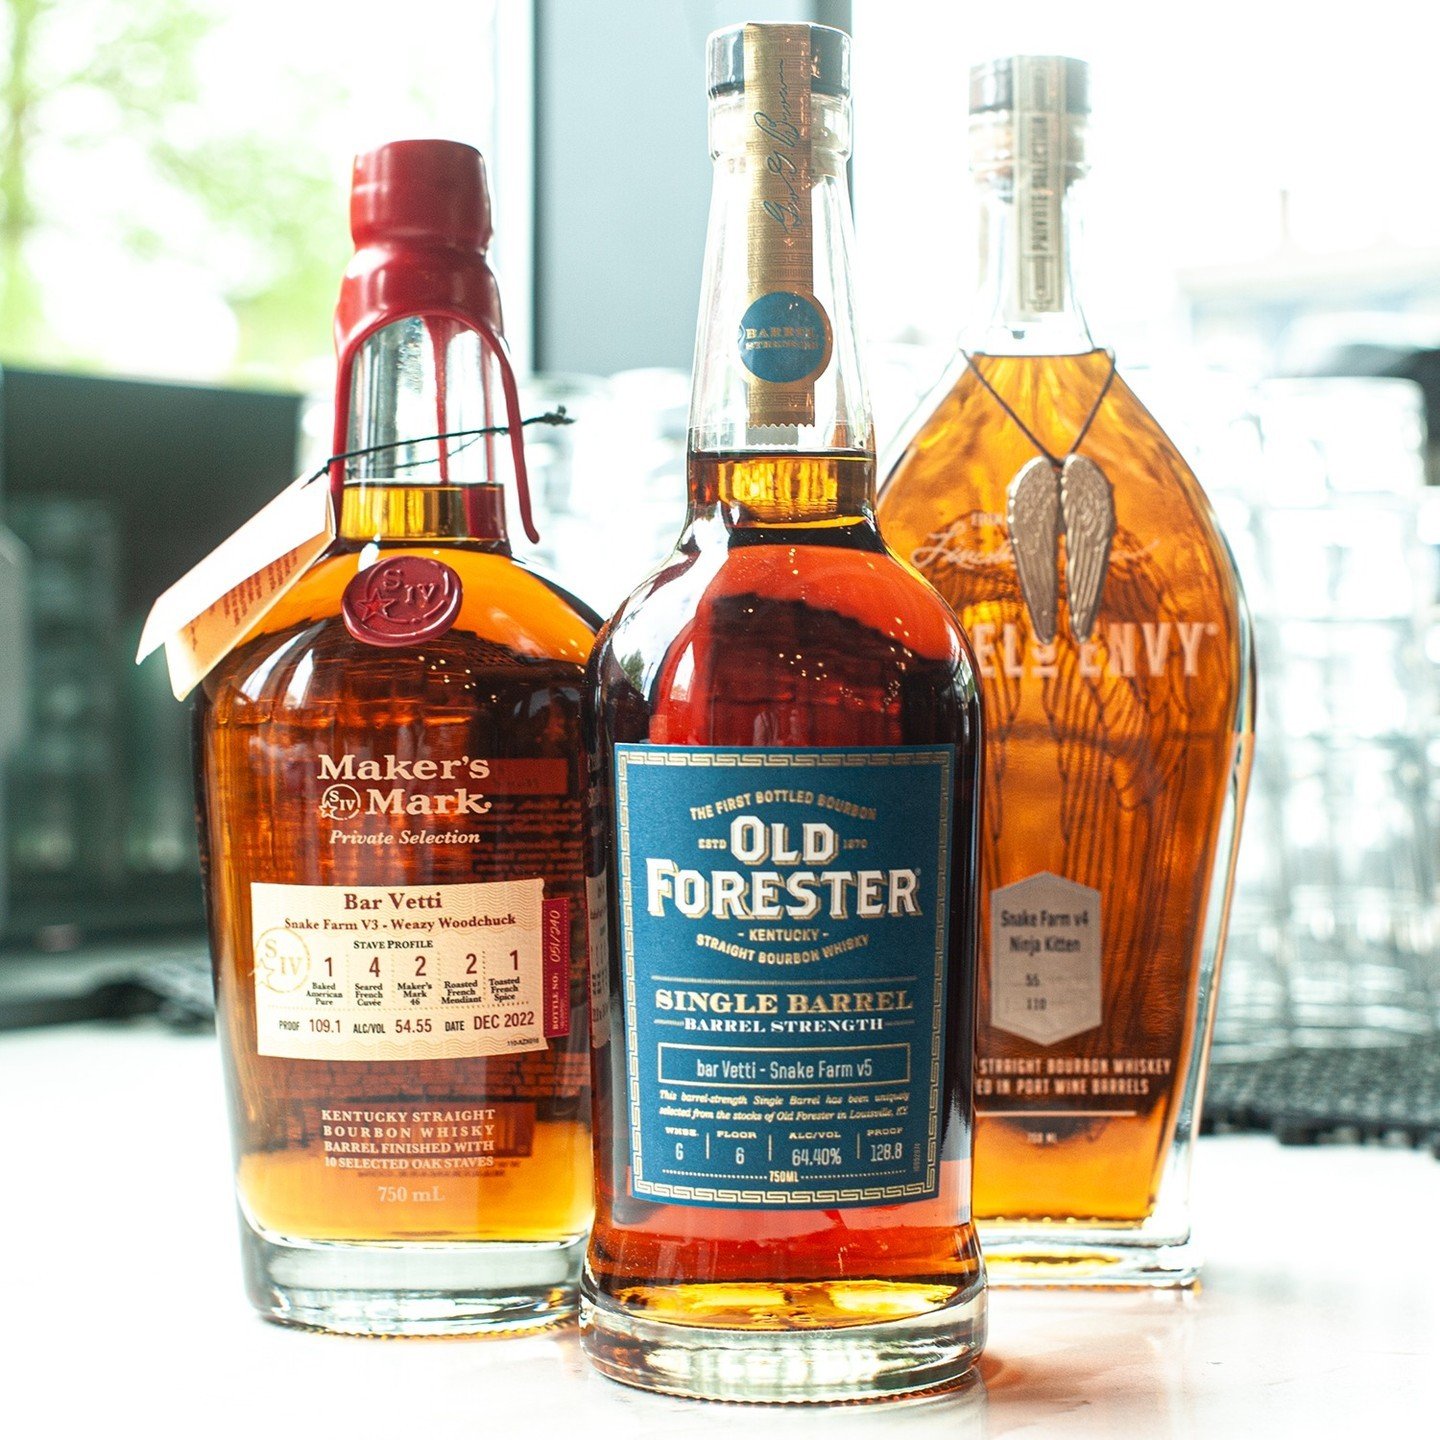 NOW LIVE

Our barrel pick with Old Forester is now available for purchase. 

Secure your bottle now at https://order.toasttab.com/online/bar-vetti-louisville